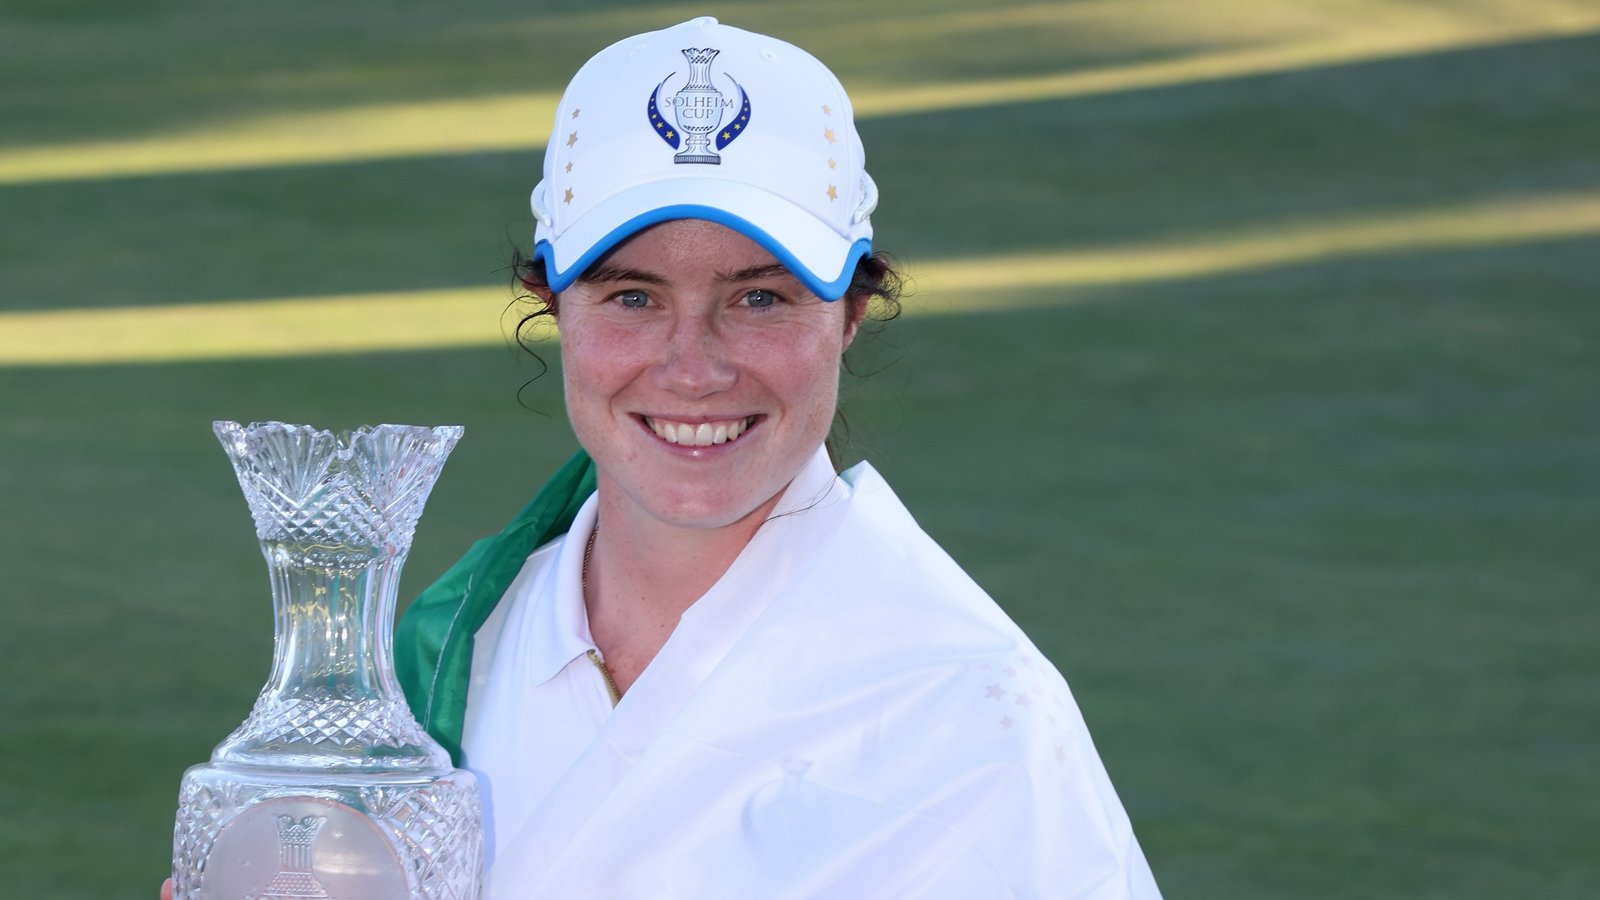 Image - 'It's great for Irish golf and women's golf in particular,' Walsh says of Leona Maguire's success